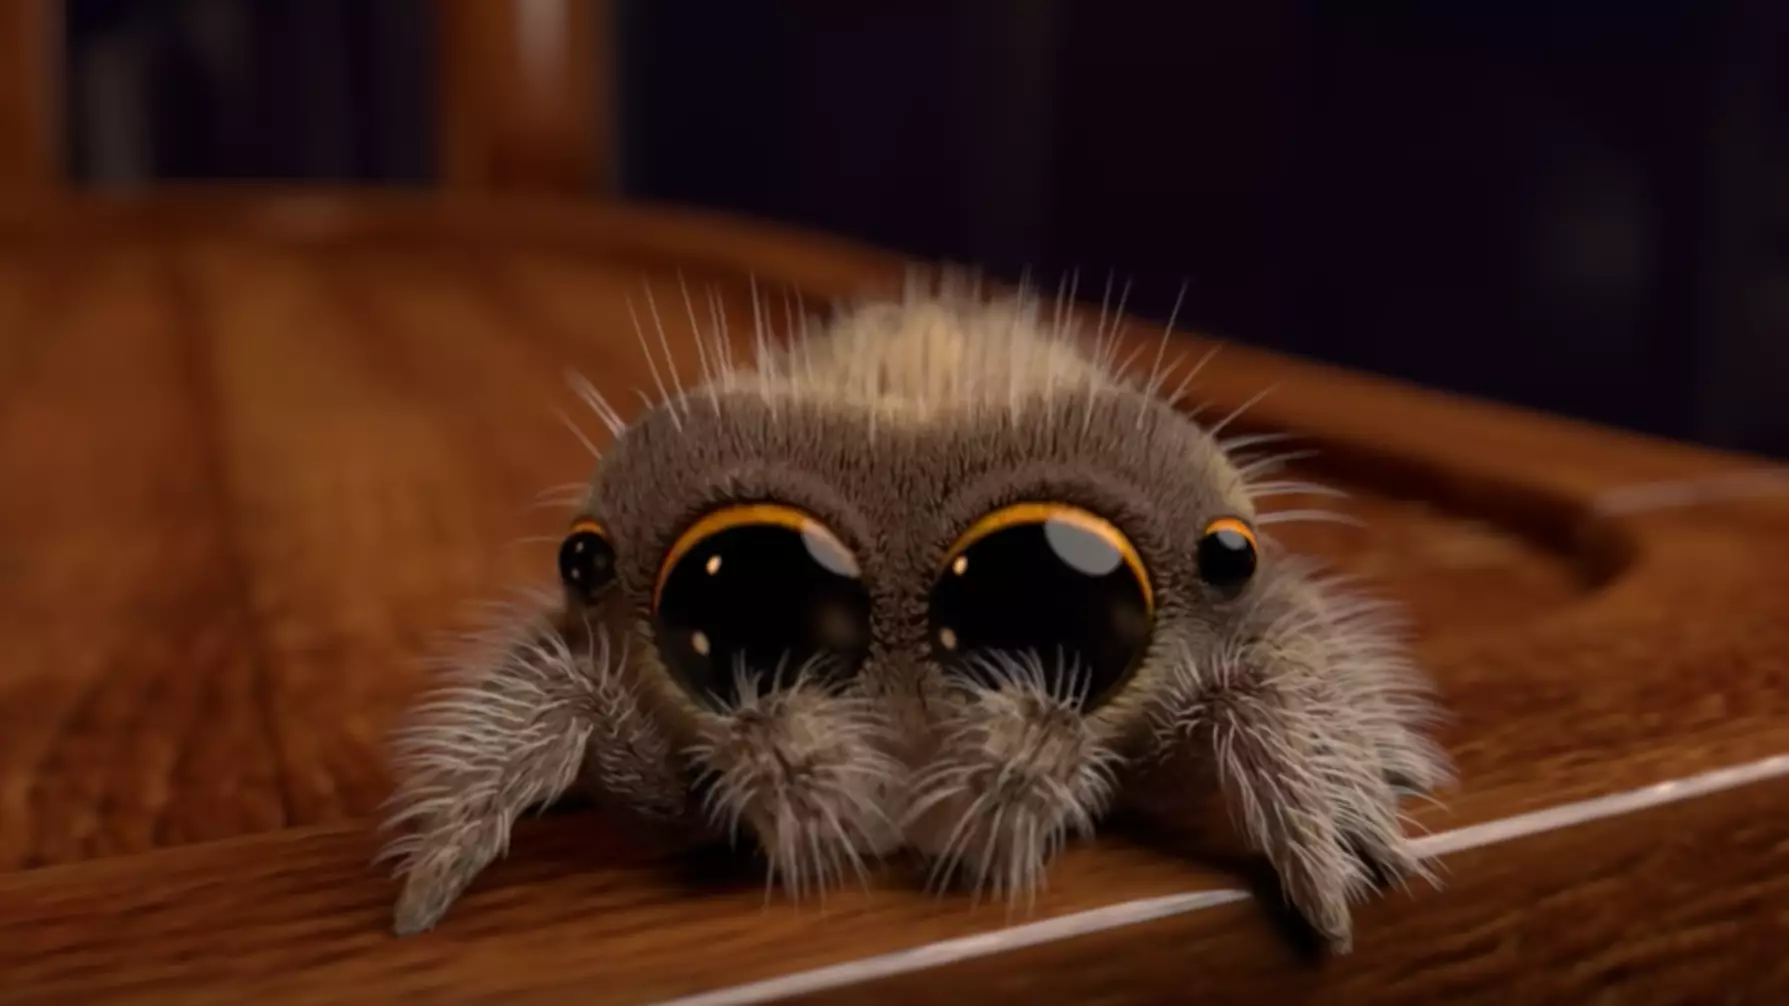 Hate Spiders? Prepare To Have Your Mind Changed